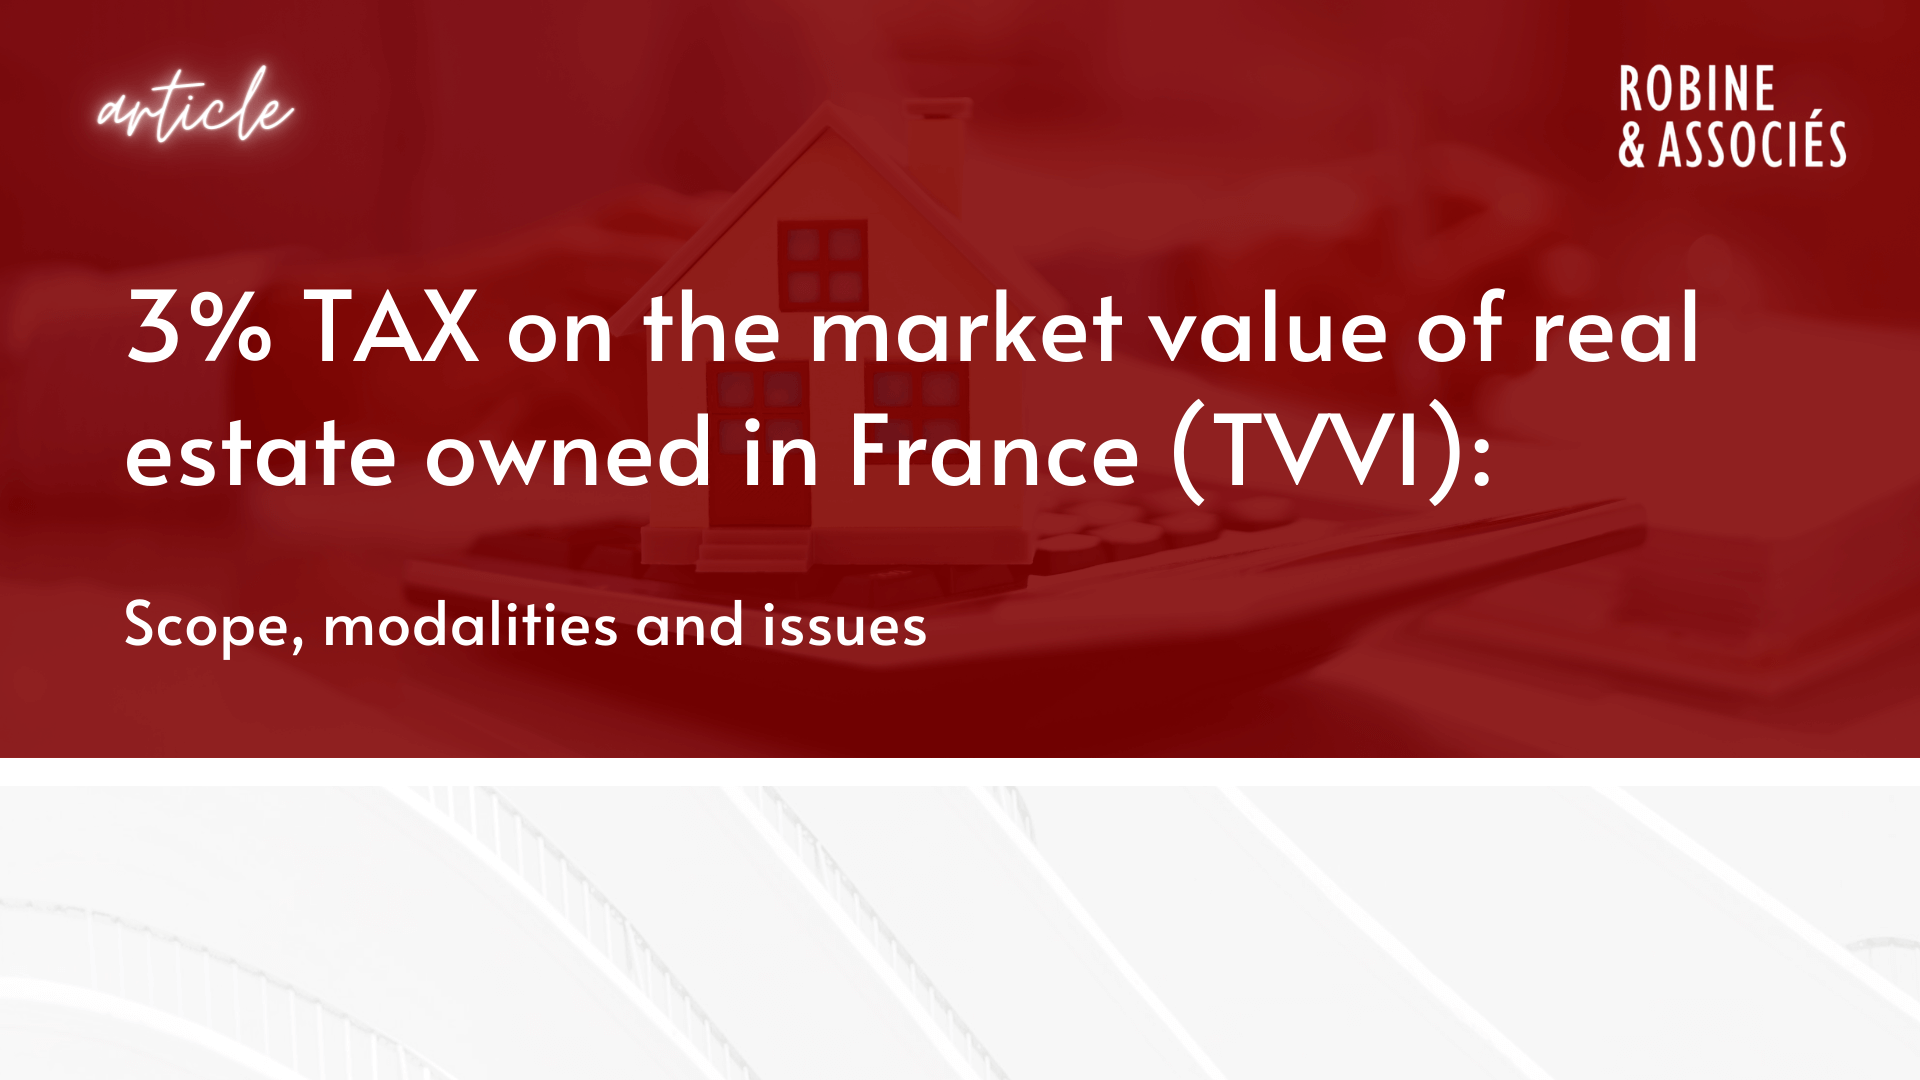 3% TAX on the market value of real estate owned in France (TVVI): scope, modalities and issues